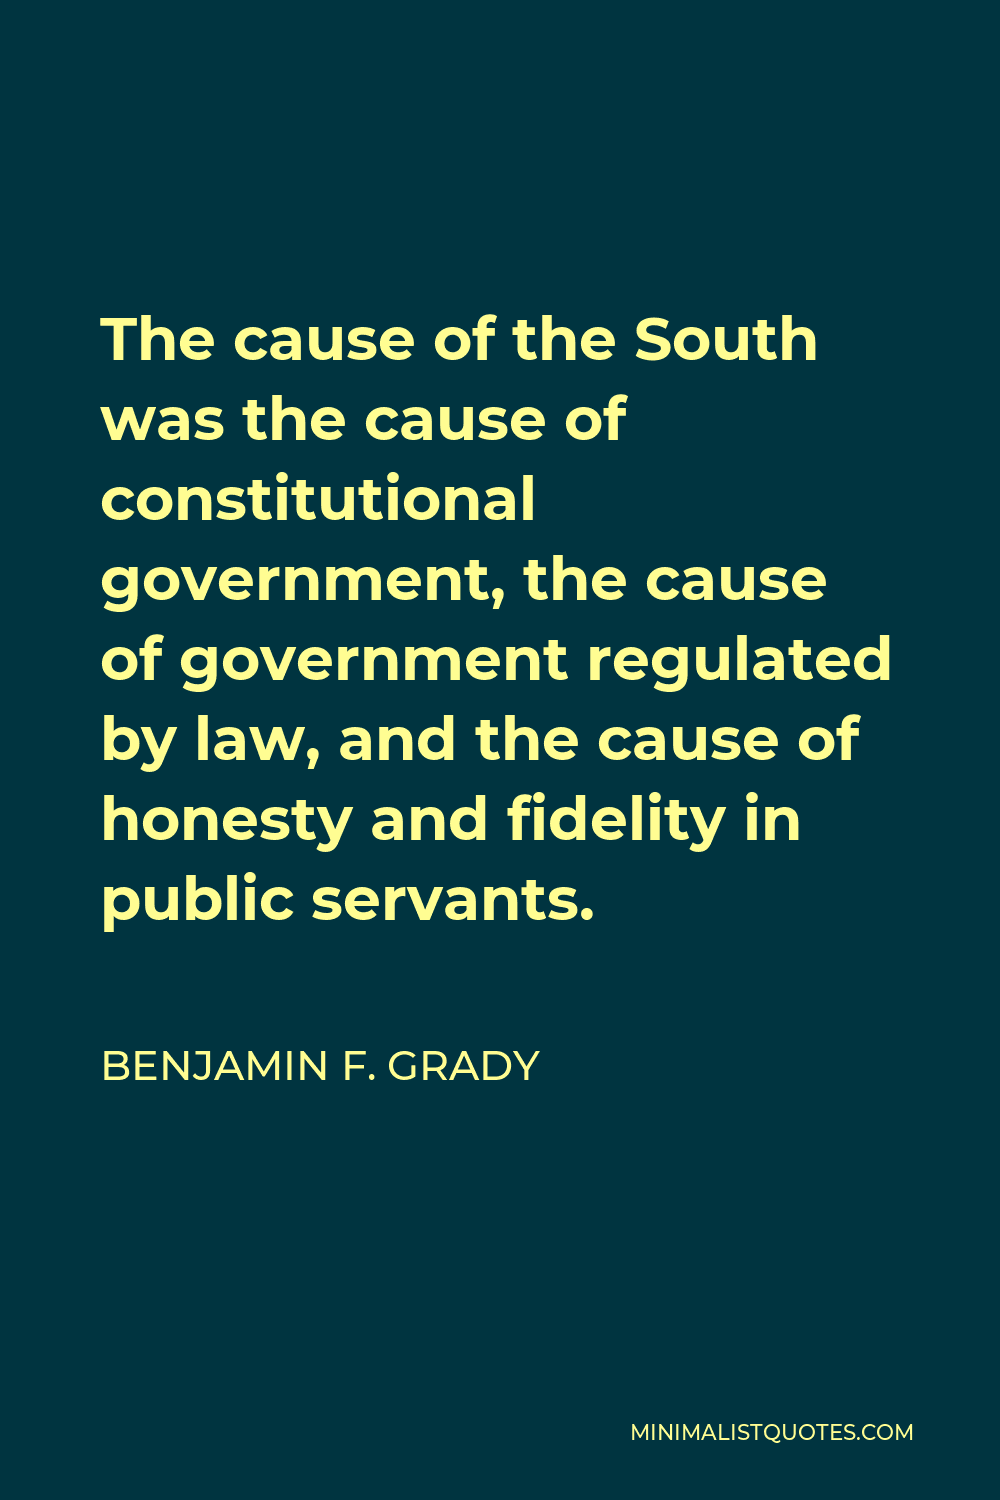 Benjamin F. Grady Quote - The cause of the South was the cause of constitutional government, the cause of government regulated by law, and the cause of honesty and fidelity in public servants.